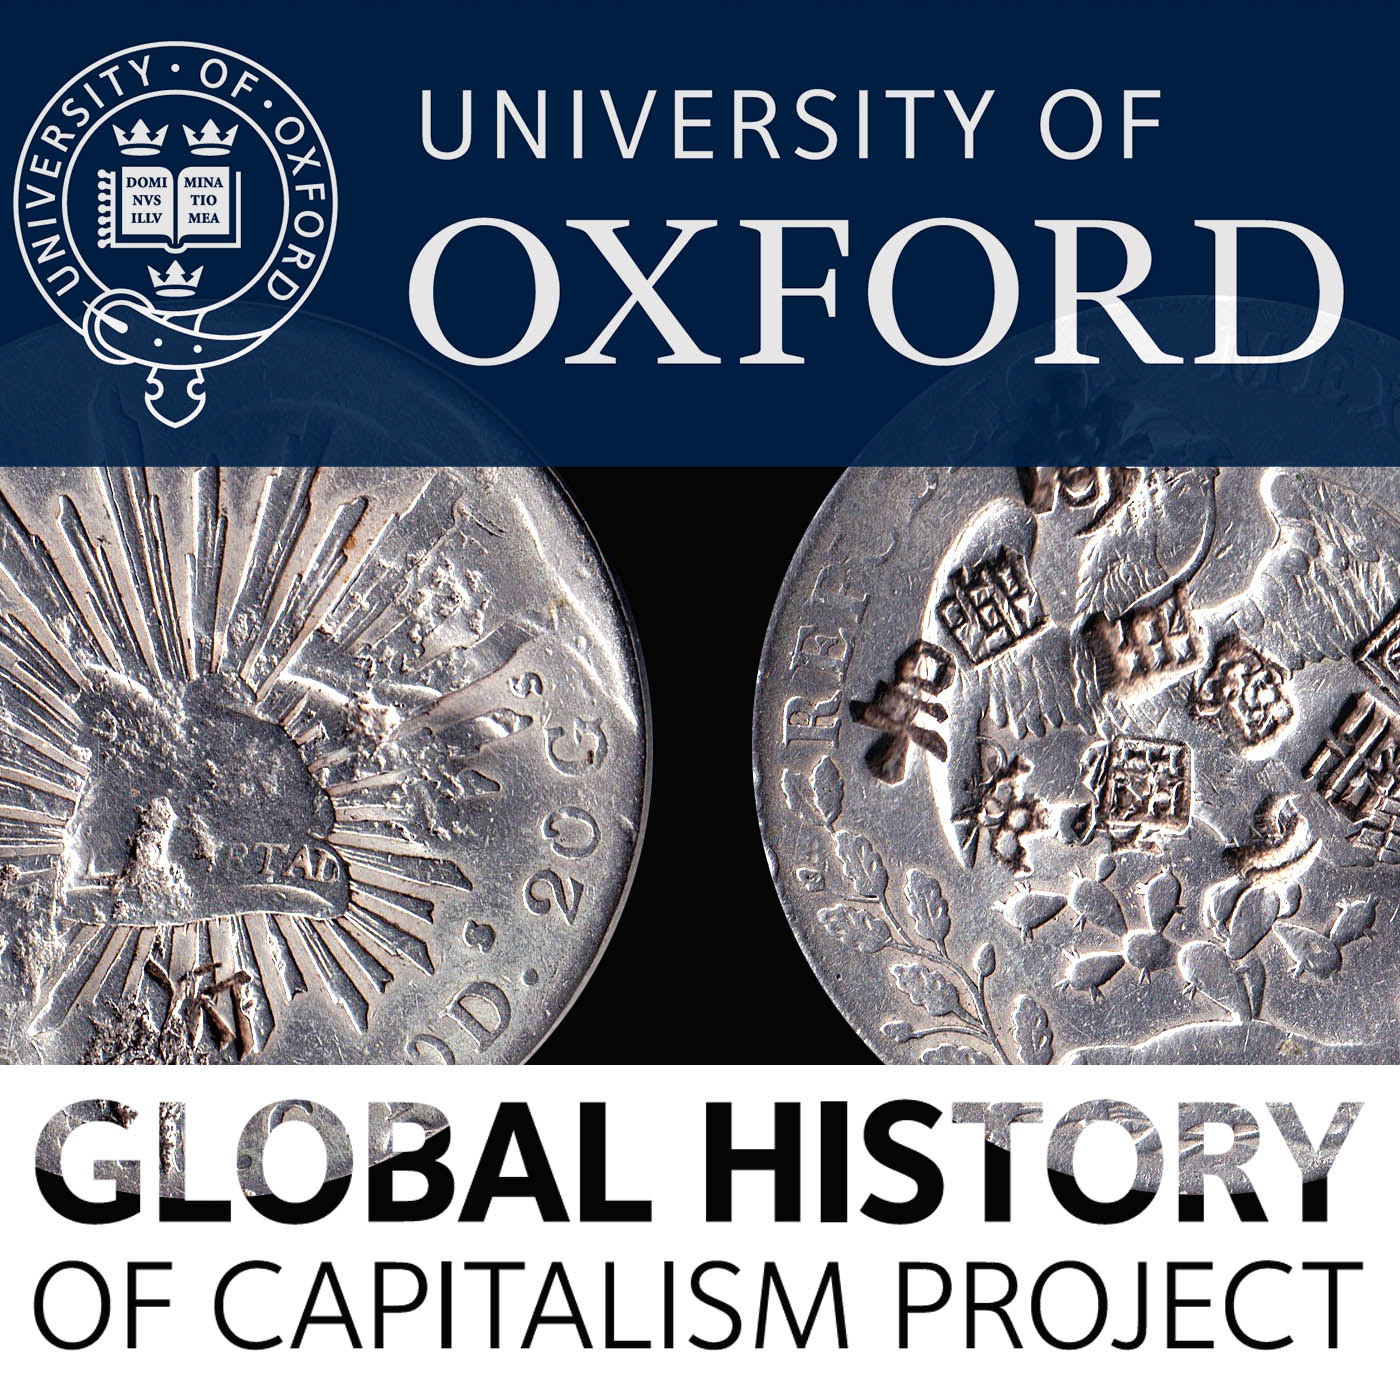 The Global History of Capitalism